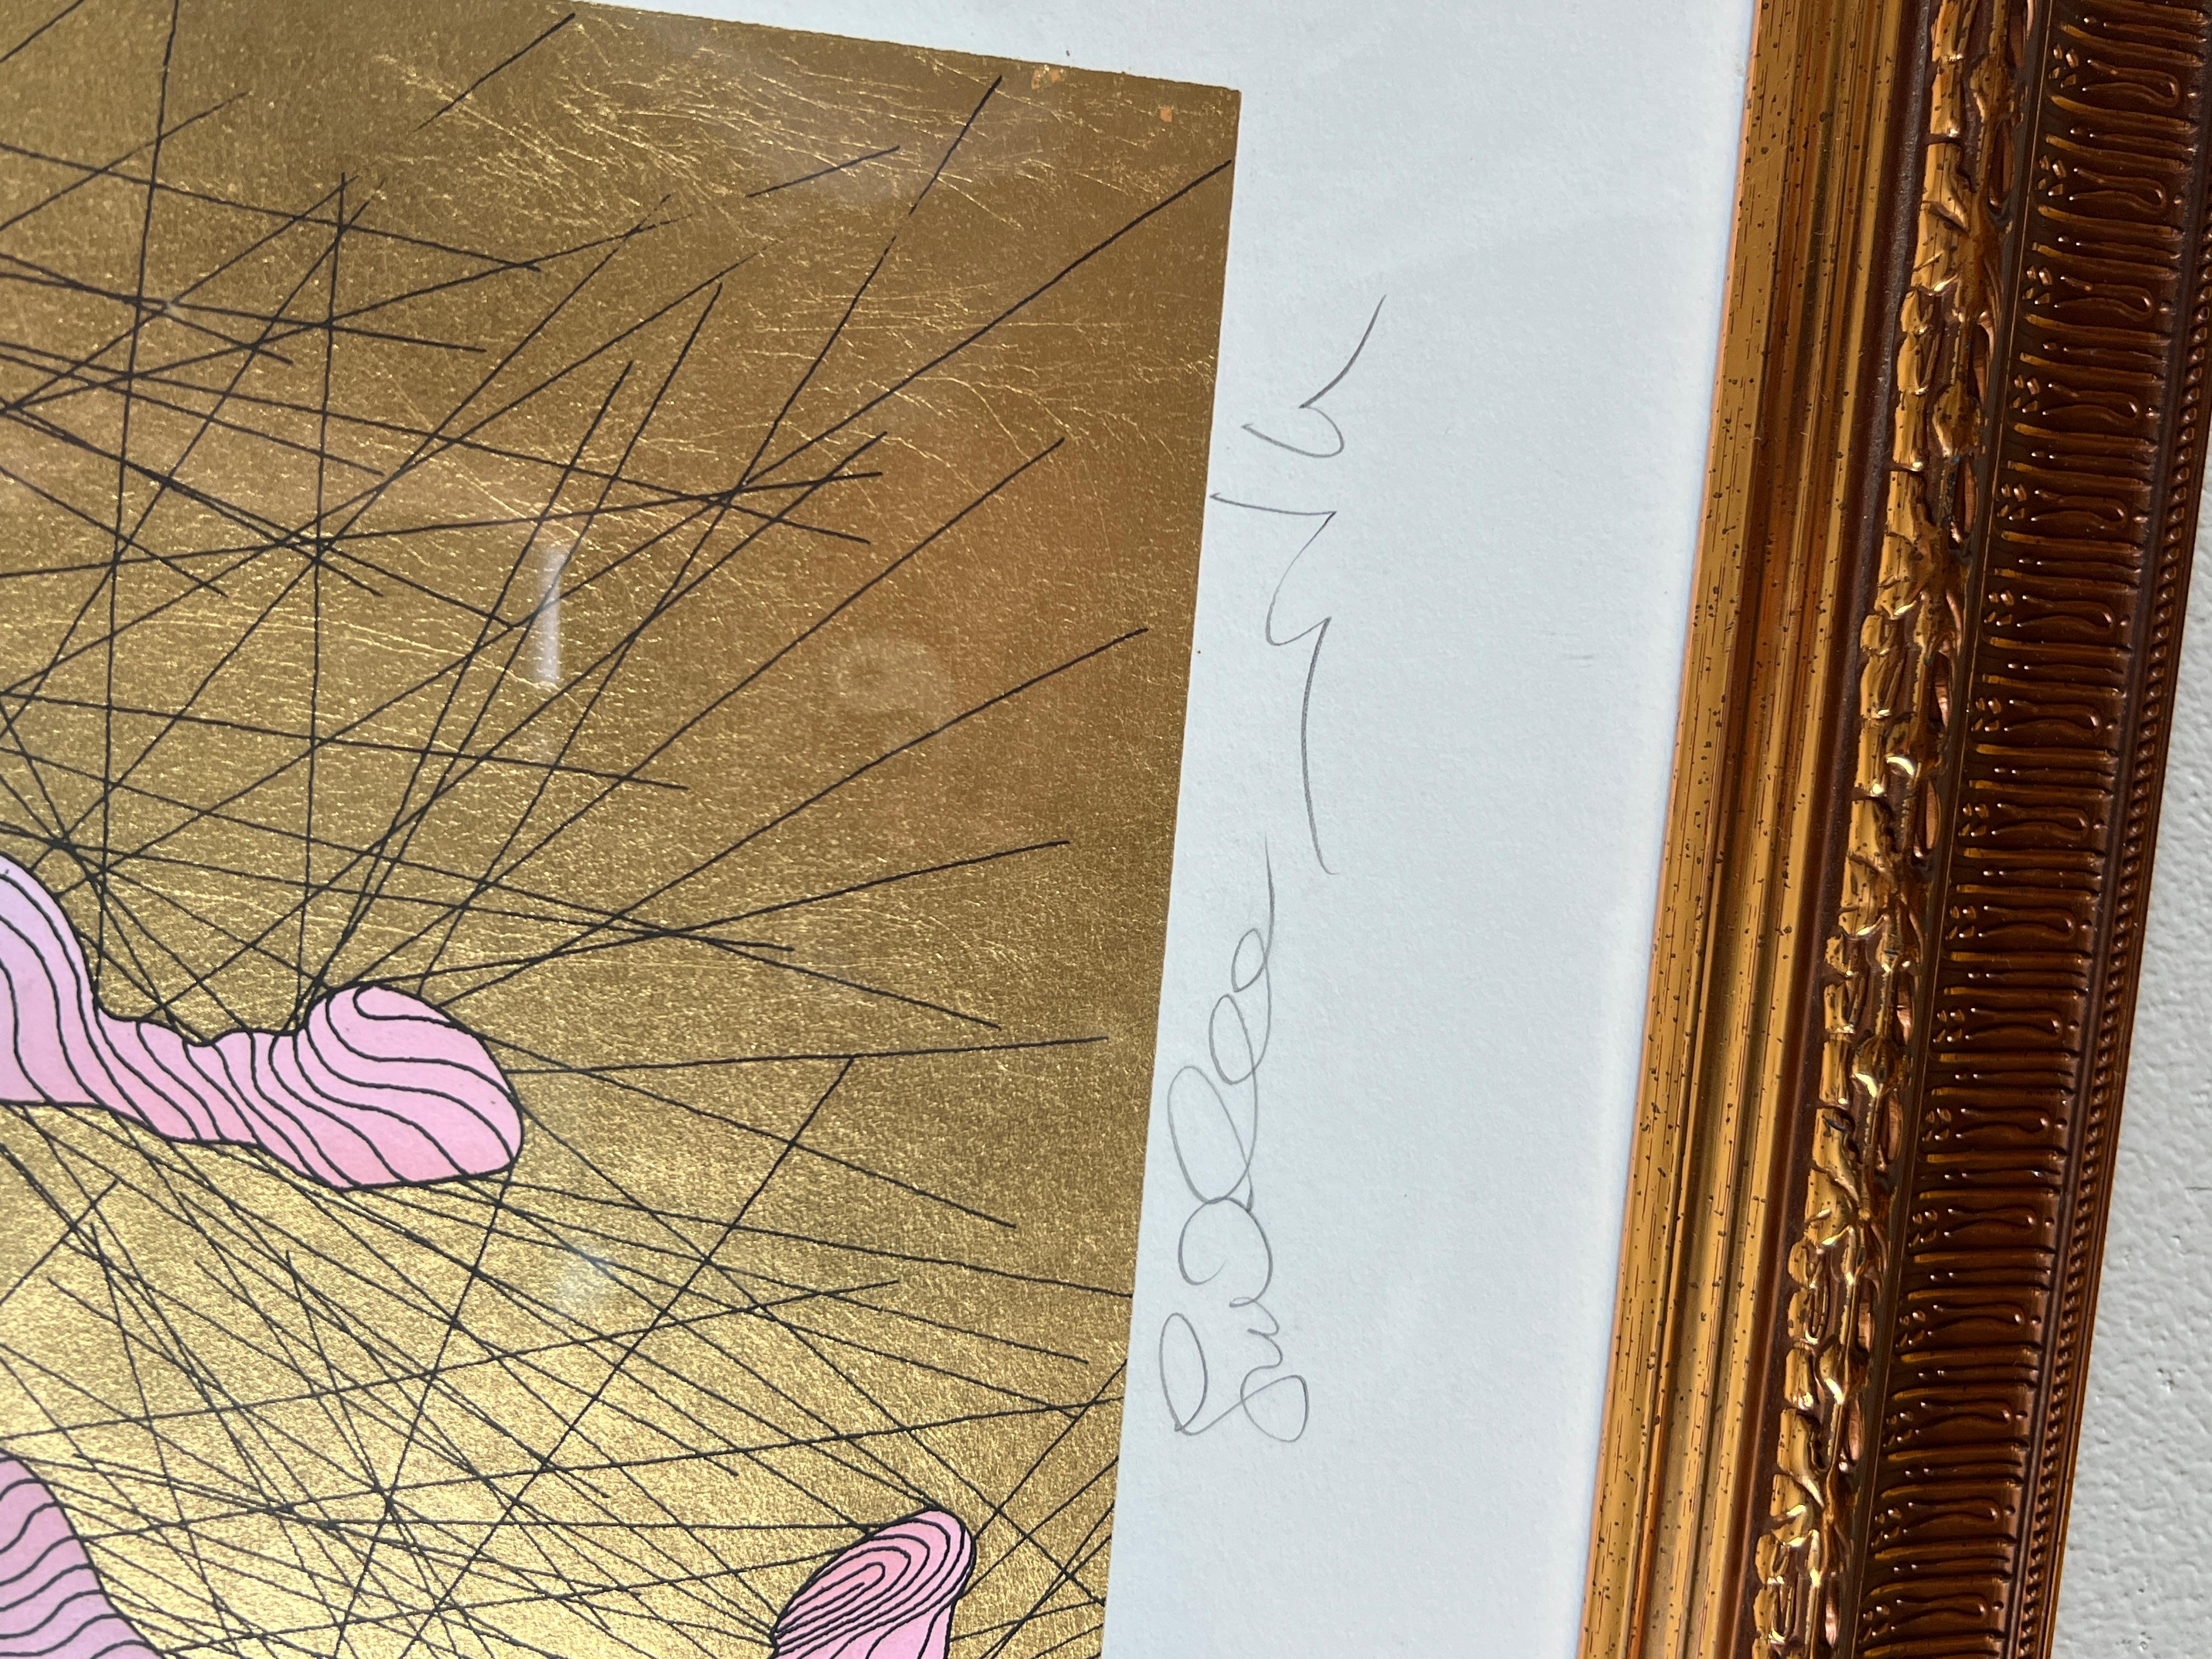 Rare Guillermo Azoulay “Robuste” Signed Art 72/100 Gold Leaf Art For Sale 7